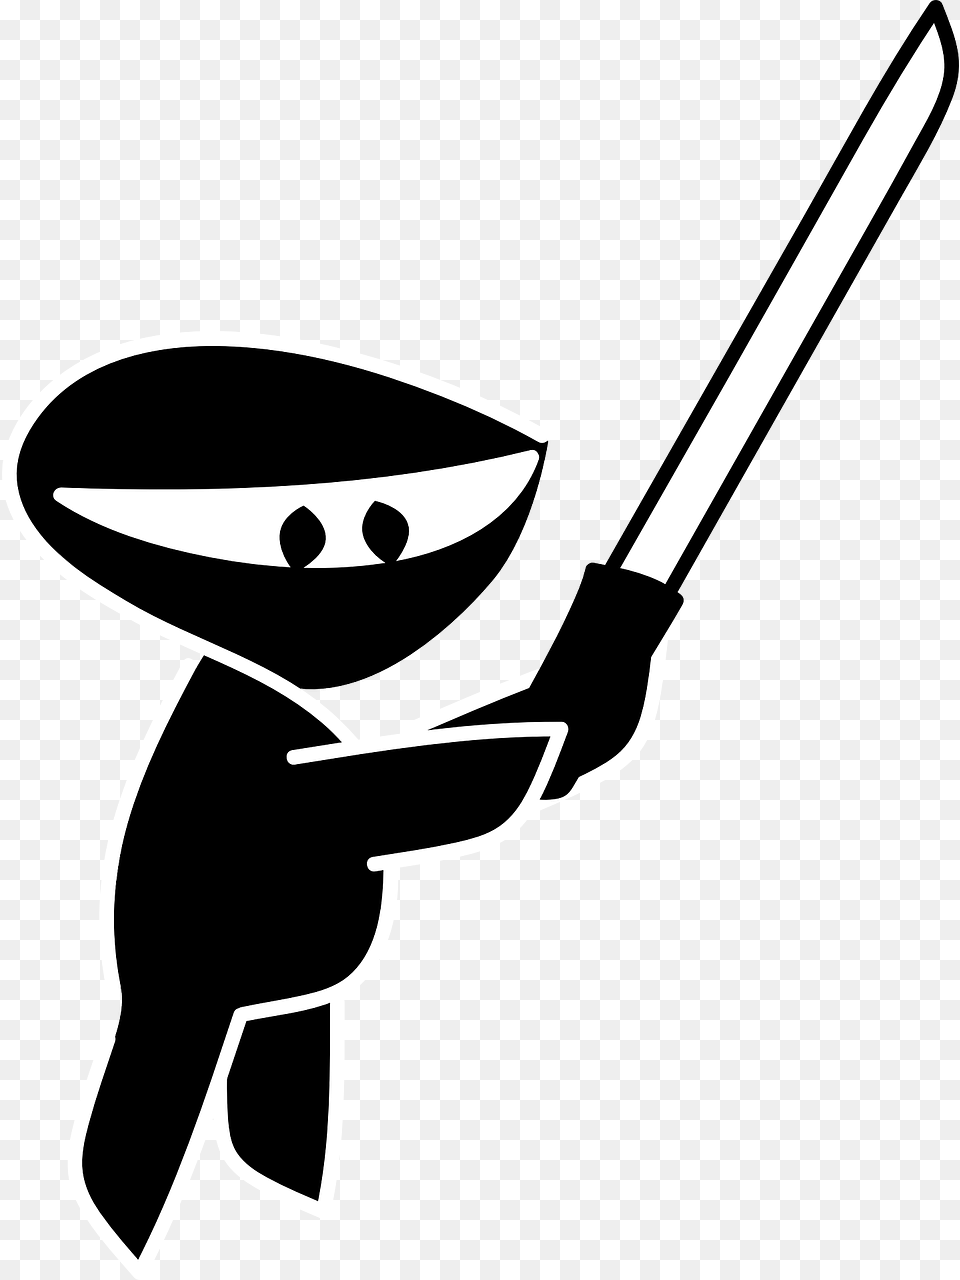 Moving Sword On Ninja Clip Art, Cutlery, Spoon, Stencil, Blade Free Transparent Png